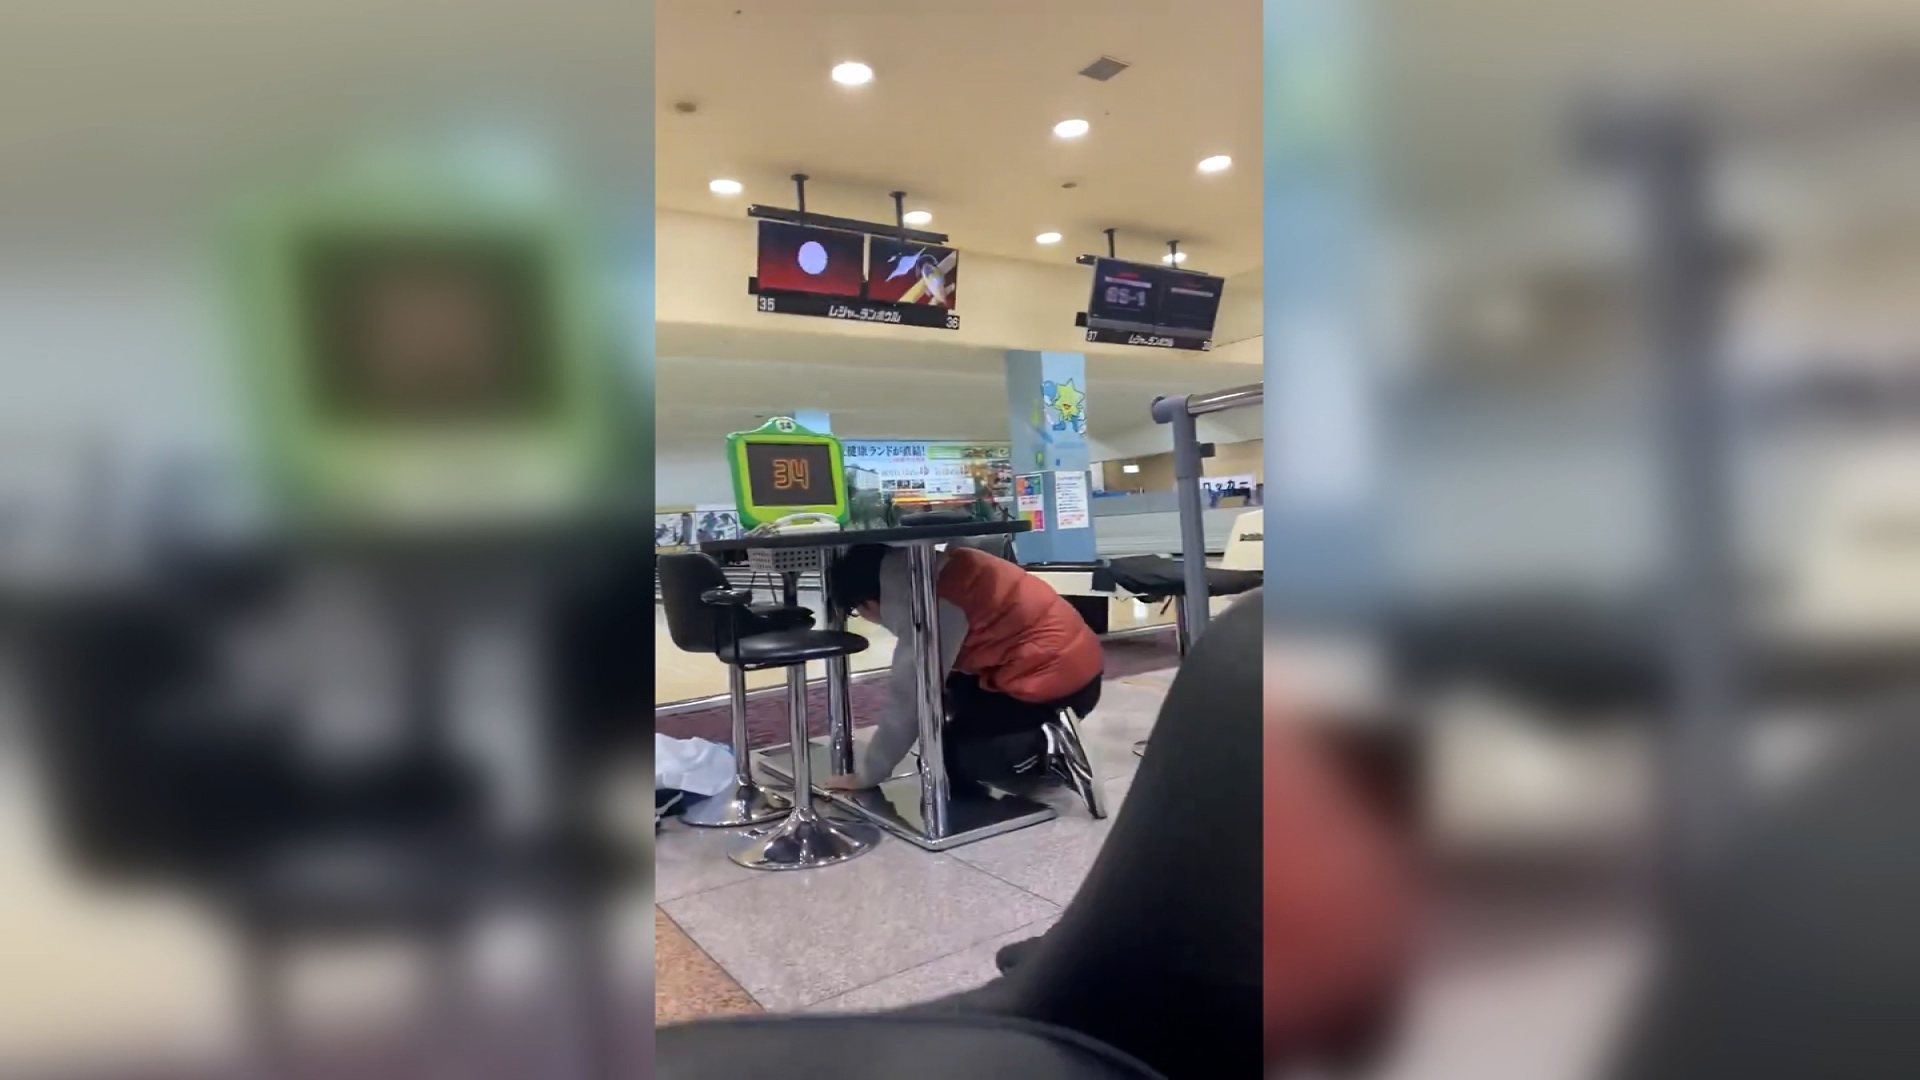 A person is seen hiding under a table at a bowling alley during the earthquake in Japan's Ishikawa Prefecture, in this screengrab taken from a video posted to social media.